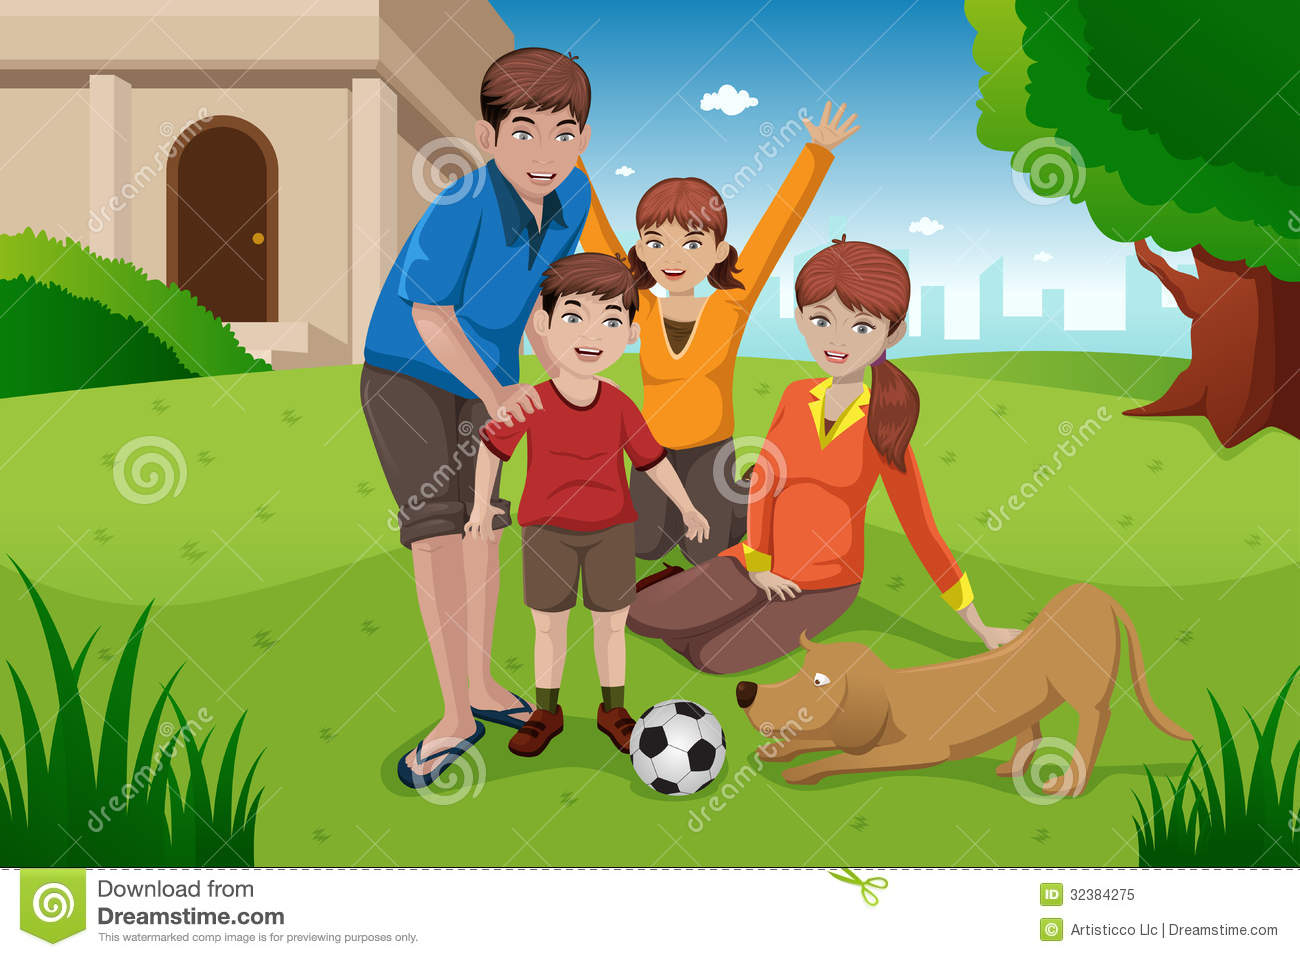 Happy Family With Pets Royalty Free Stock Photo   Image  32384275